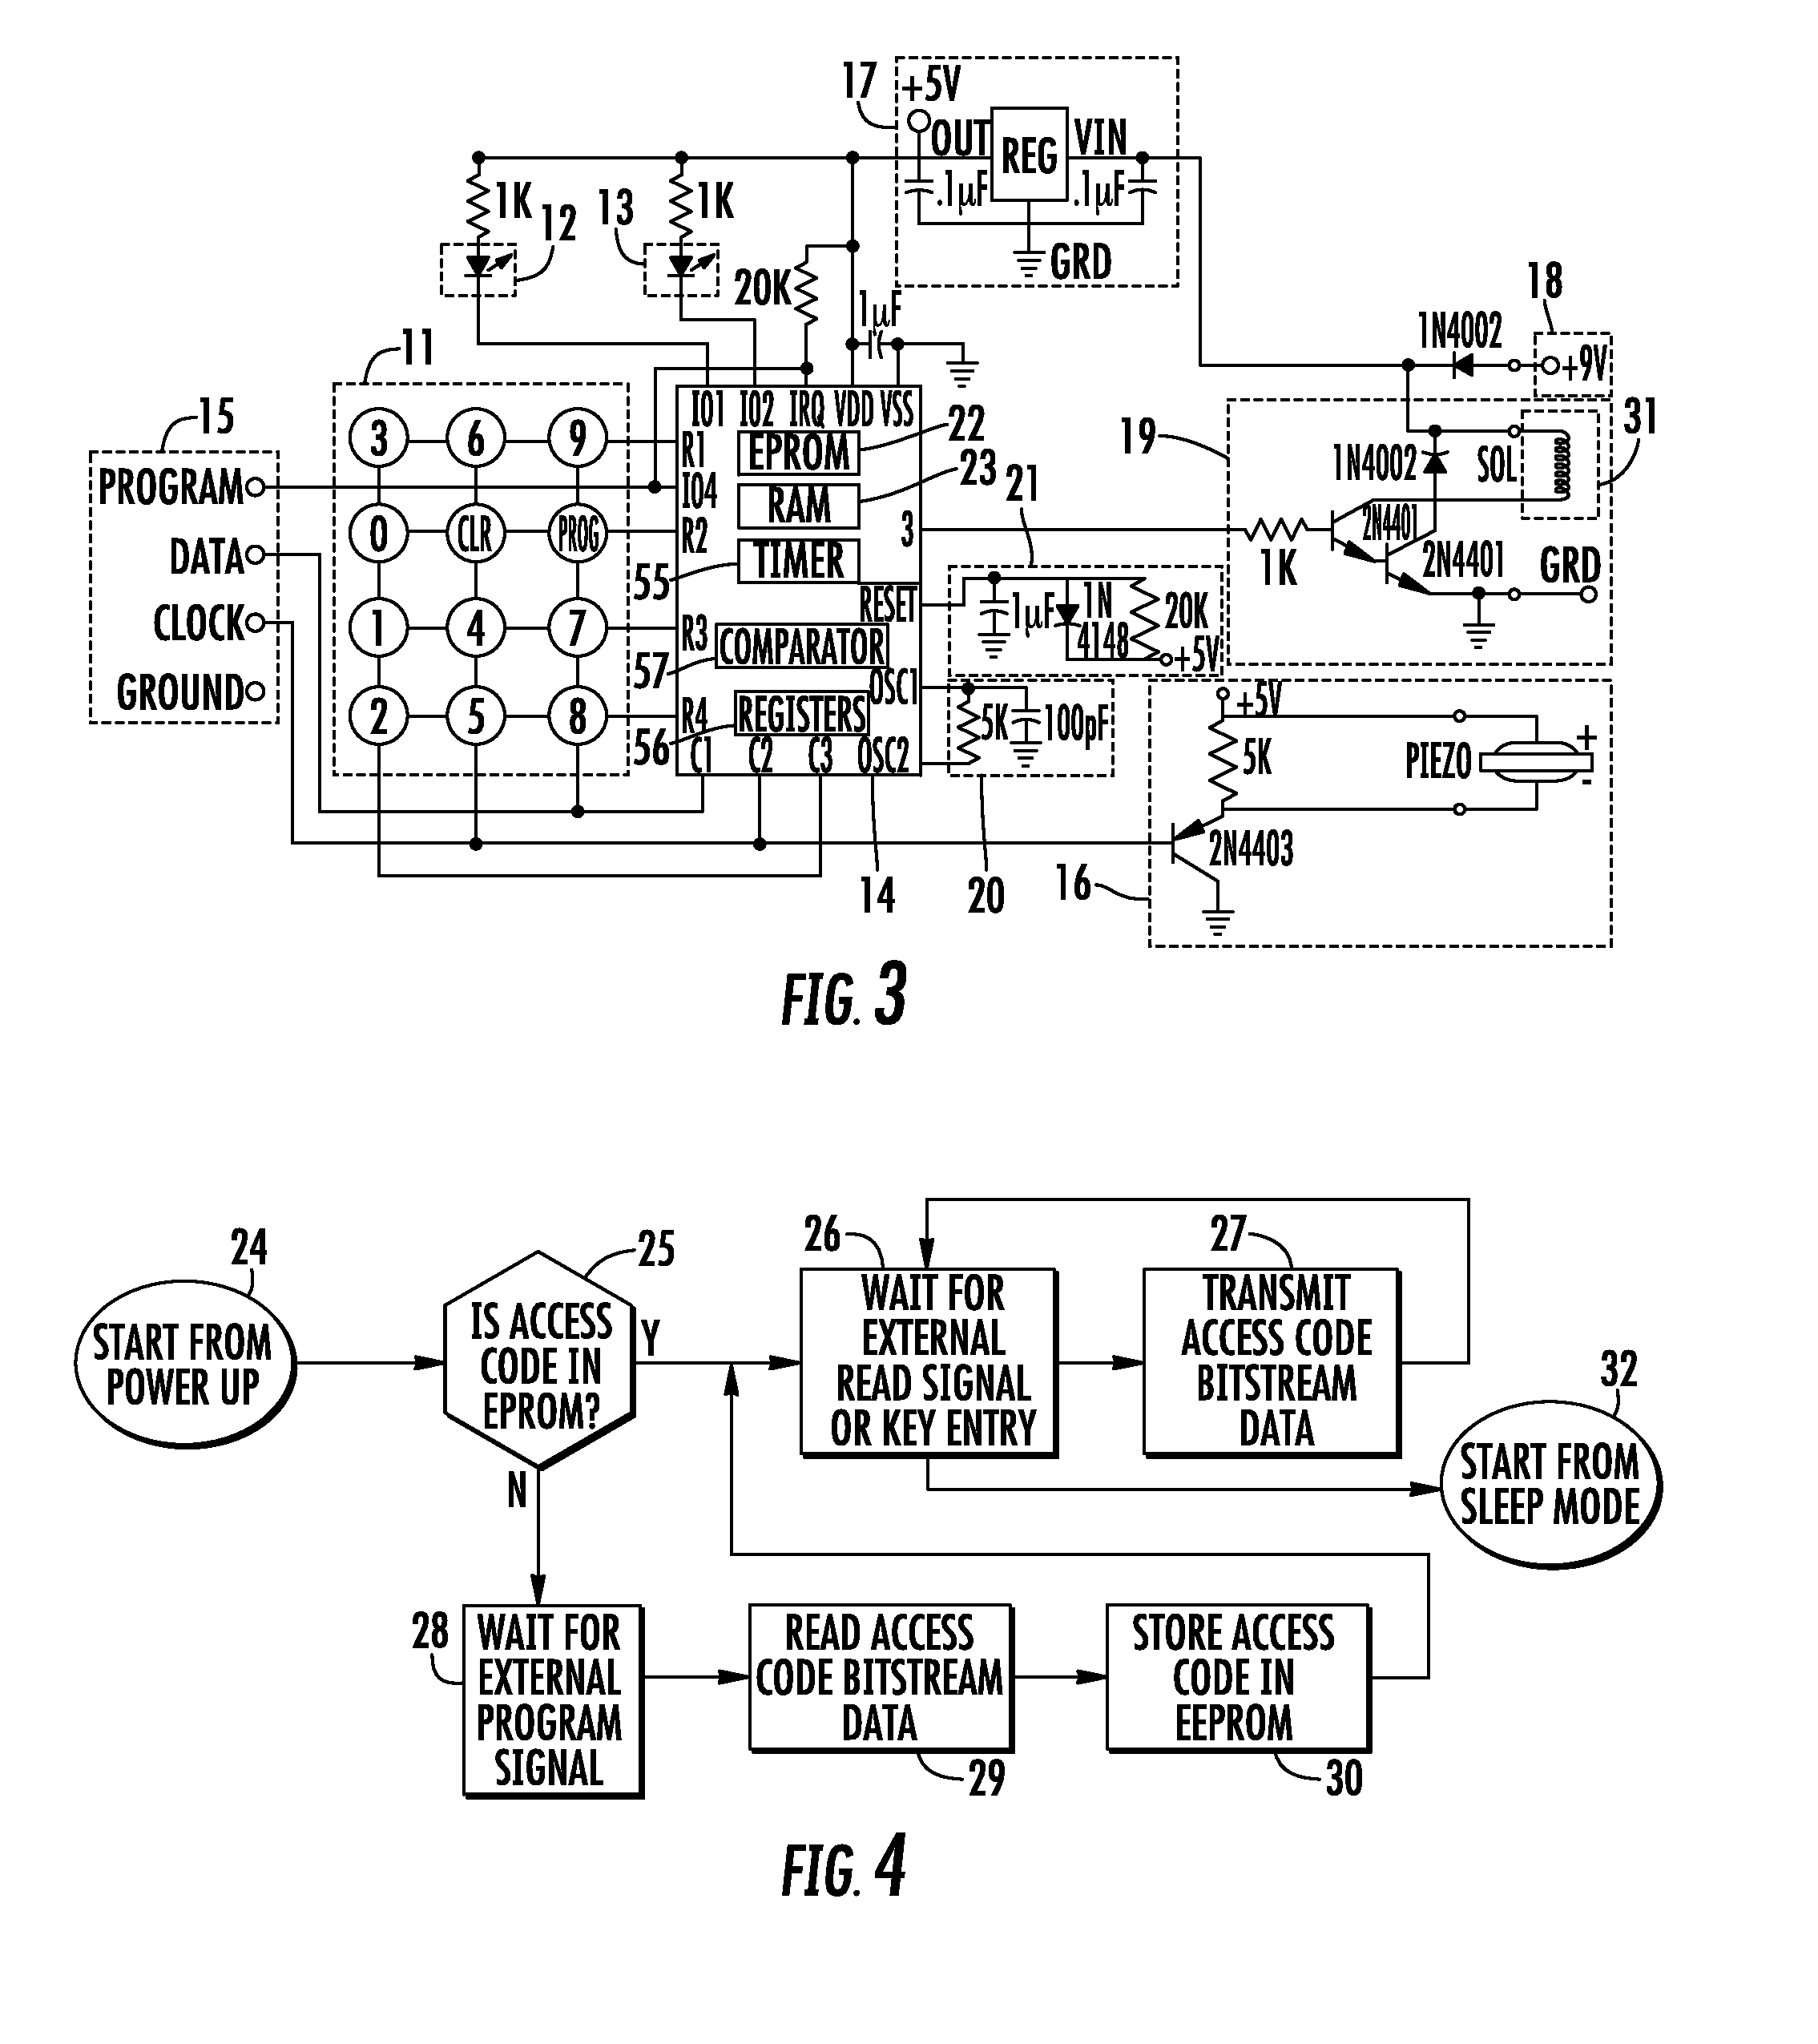 Electronic Access Control Device and Management System